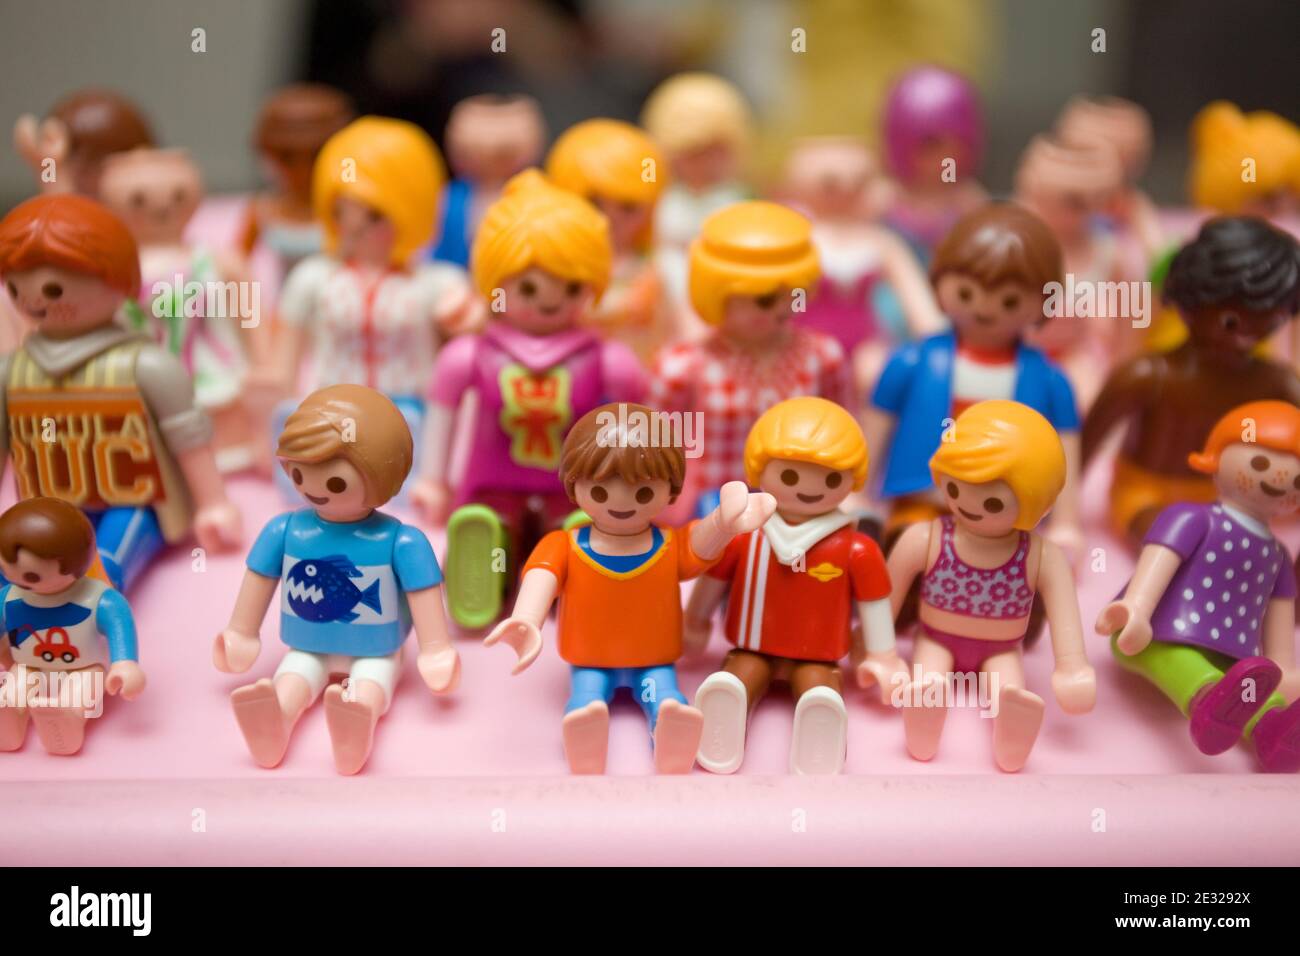 Playmobil characters sitting and standing Stock Photo - Alamy